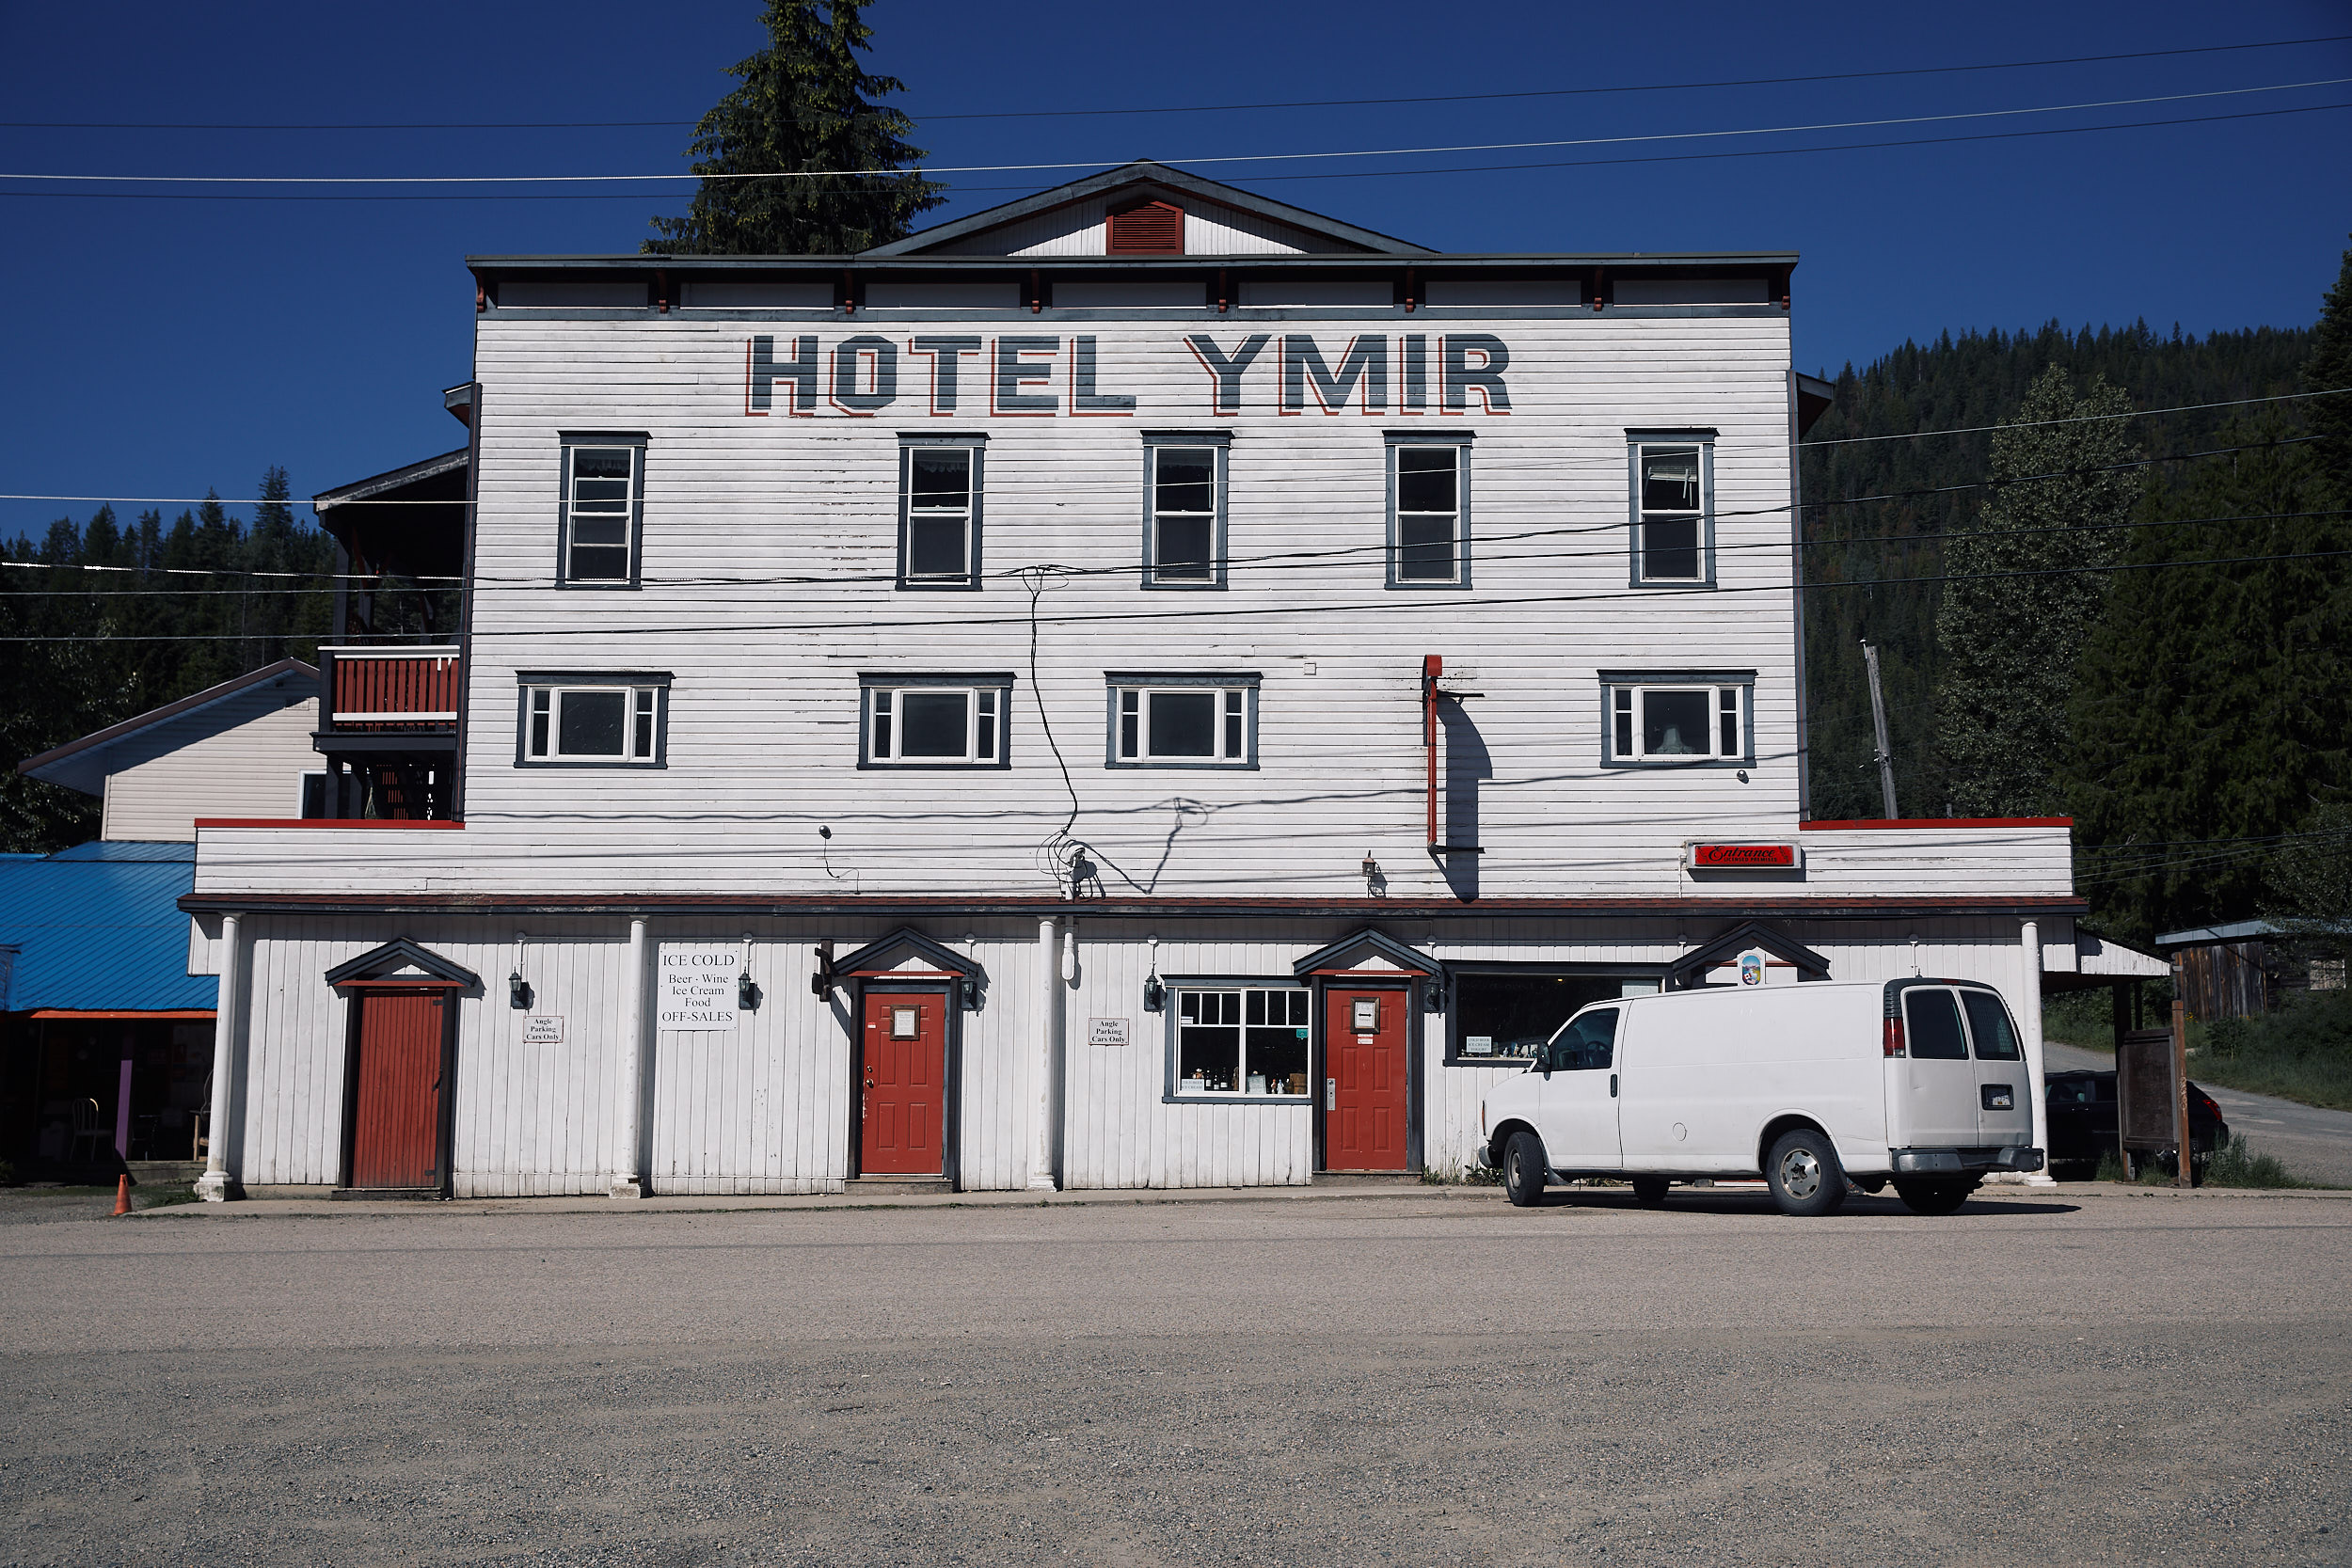  That night we stayed in the very quirky little town of Ymir. The inside of this historic hotel is hard to describe but it was incredible in it’s eclectic craziness. Definitely coming back here! 